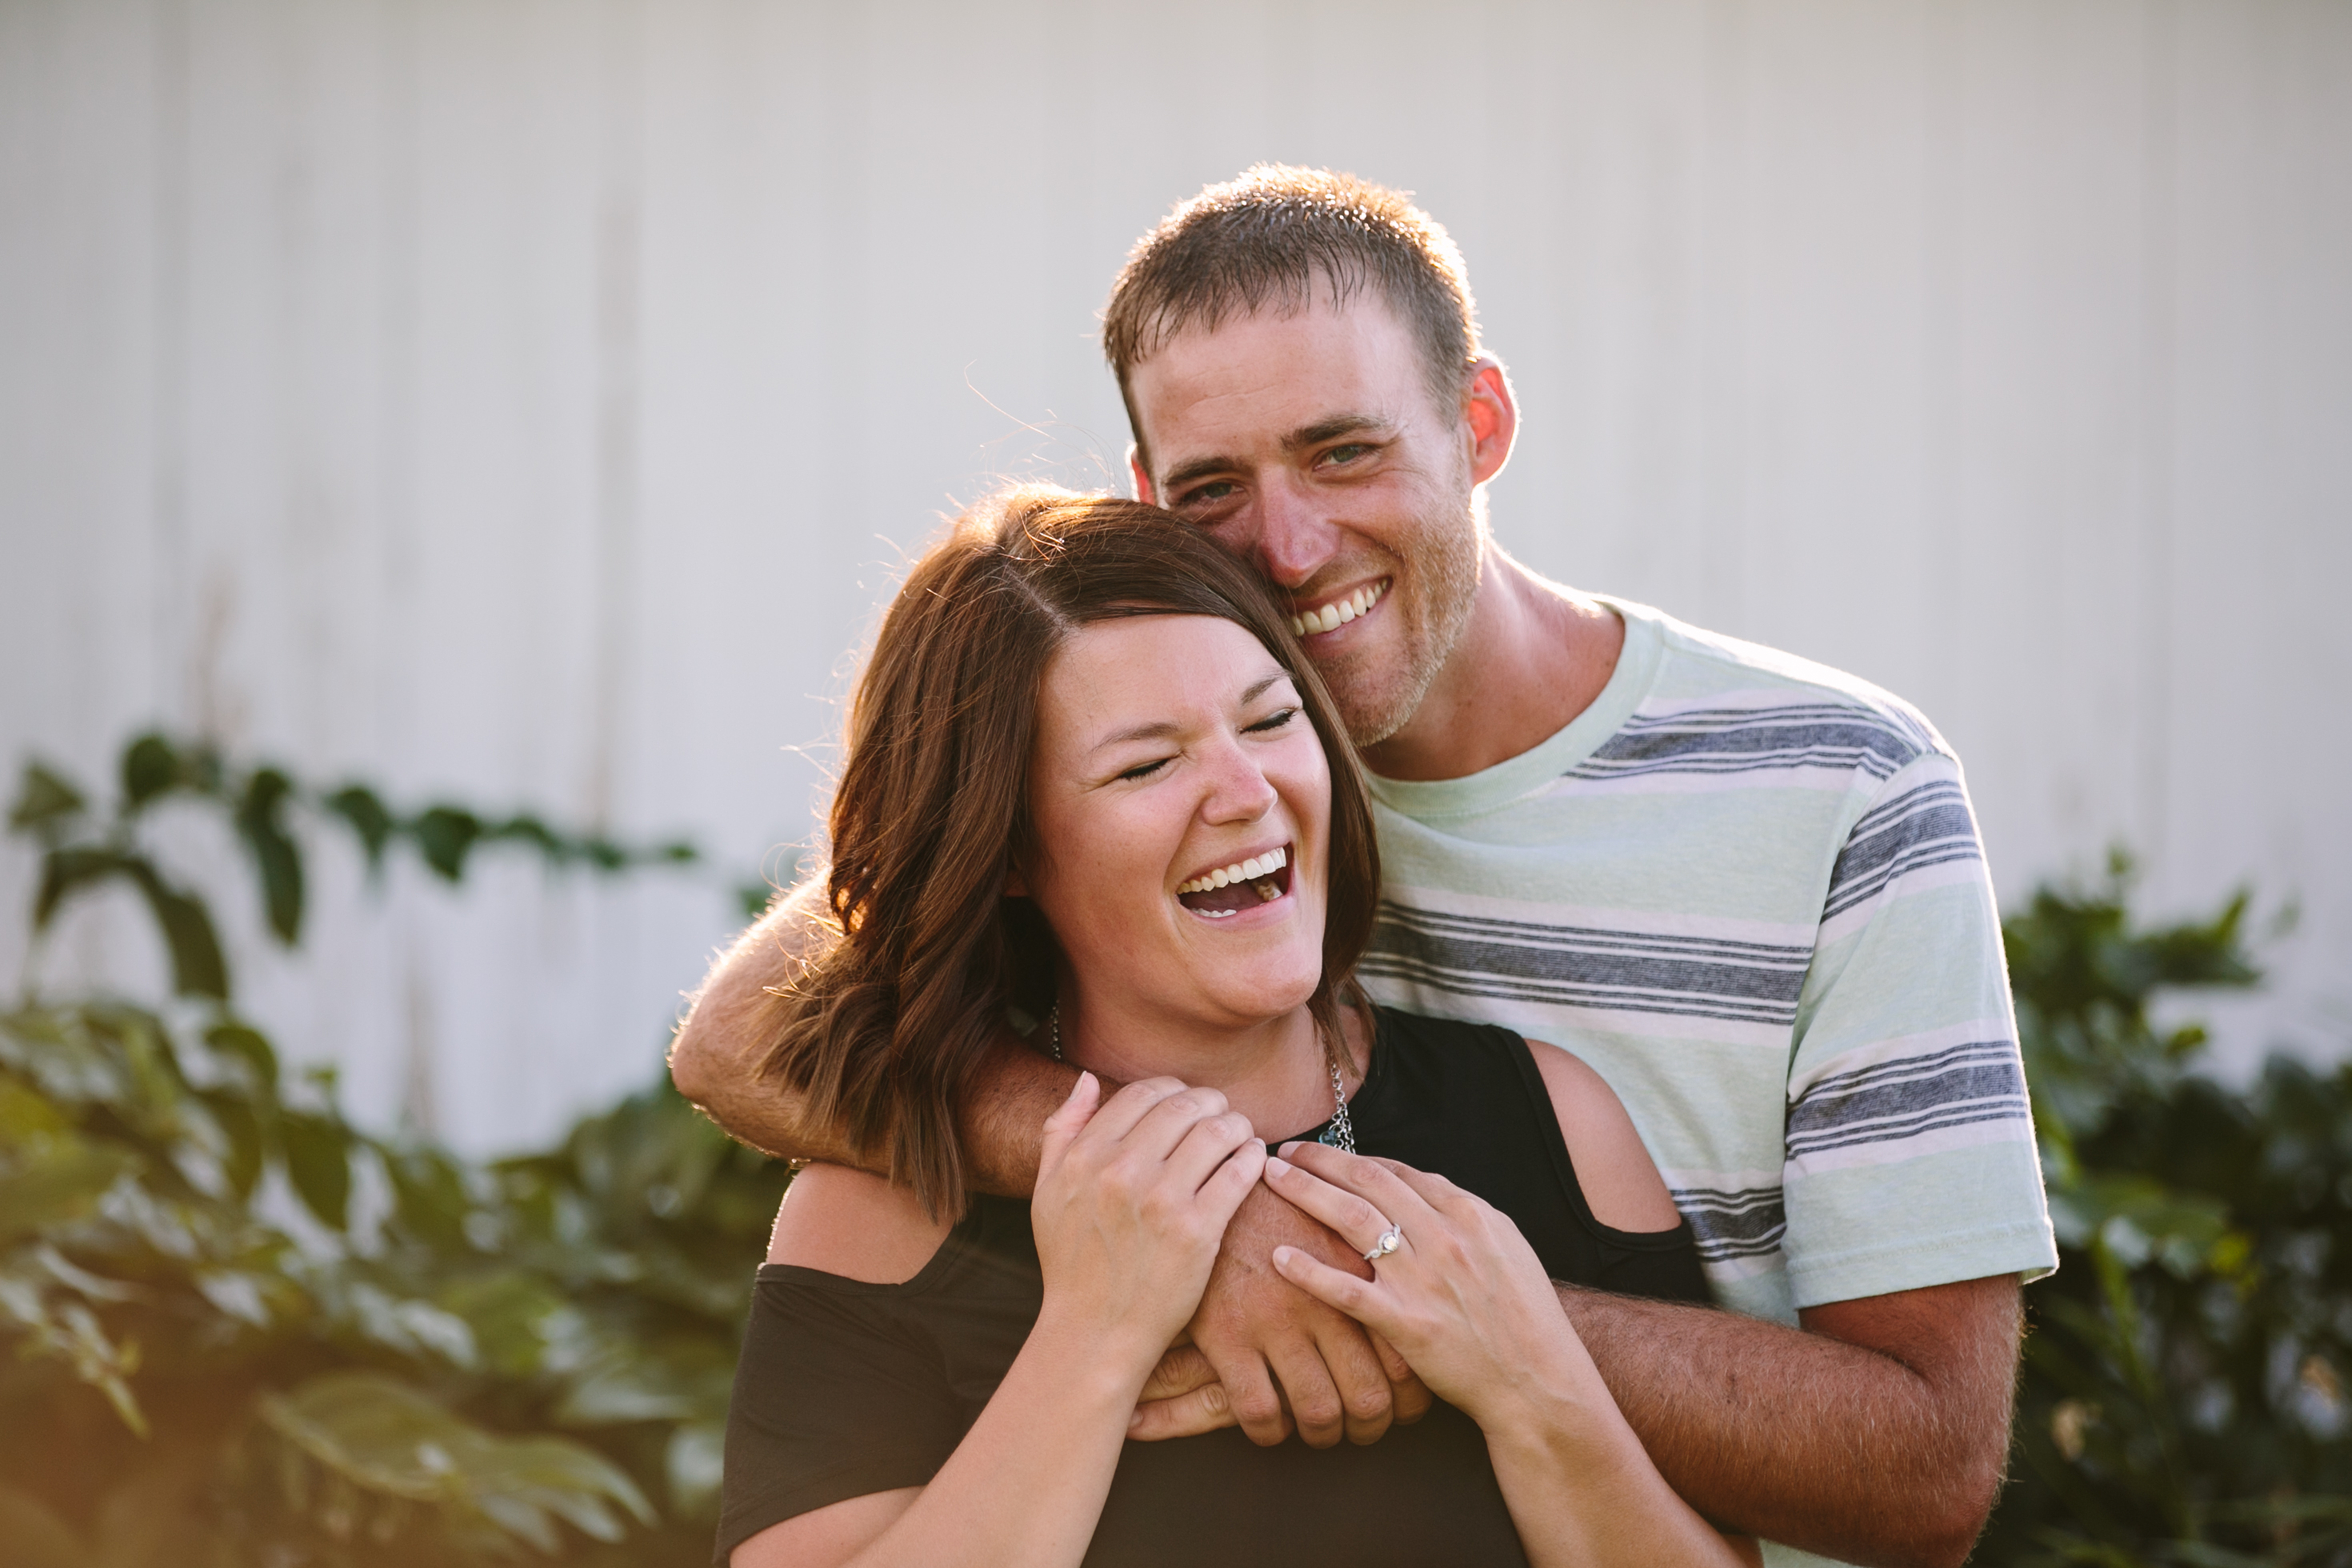 outdoor dubuque engagement session by catherine furlin photography, couple laughing 